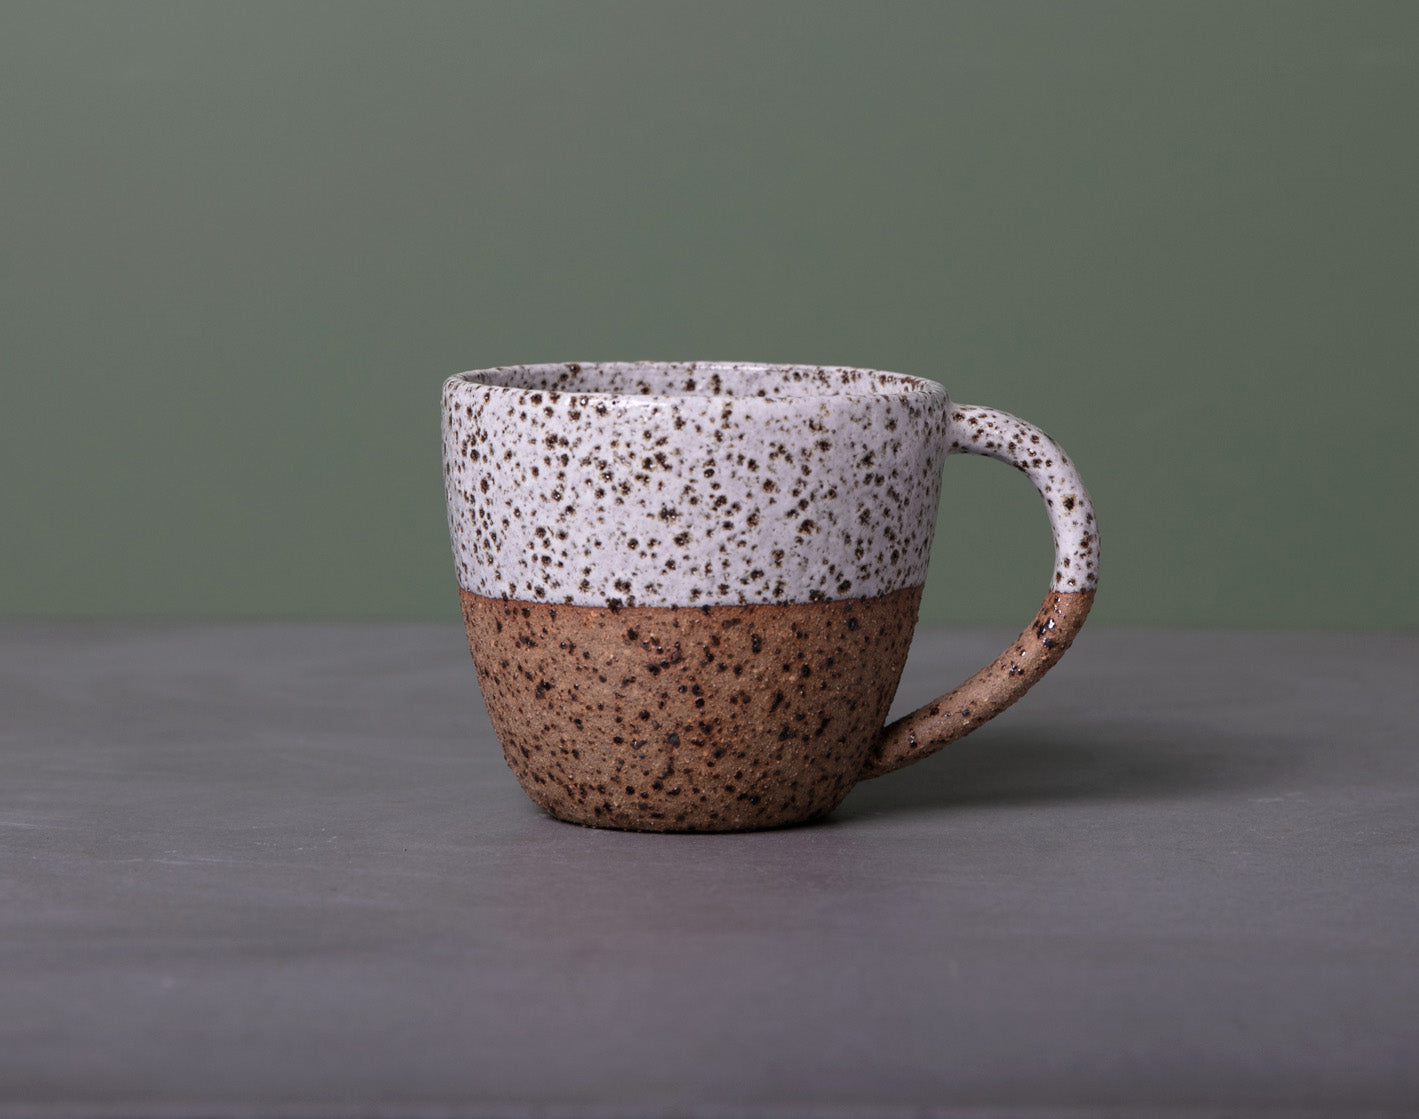 HIGH TIDE MUG - SPECKLED CLAY - S/M/L